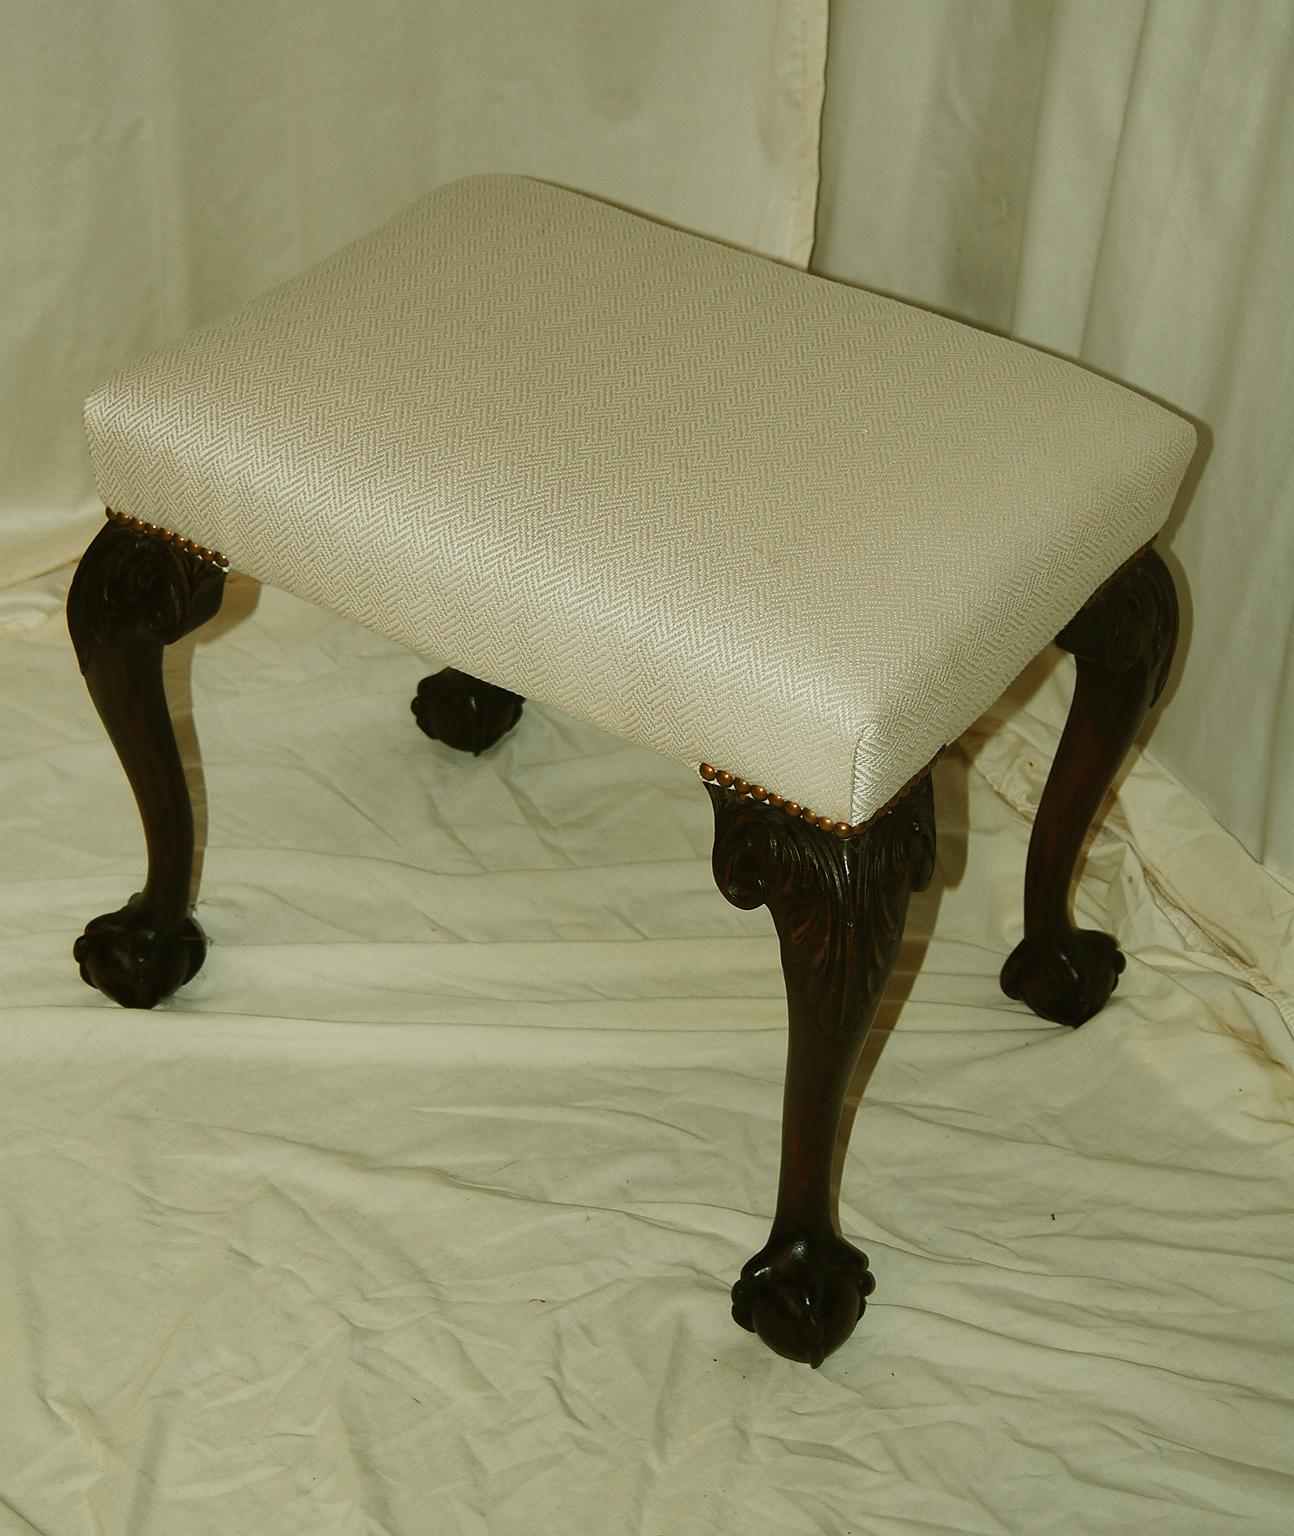 English Chippendale style mahogany stool with cabriole legs. The cabriole legs are hand carved with acanthus leaves on the knees and end in ball and claw carved feet. This classic stool is well executed and has been upholstered in a cream colored